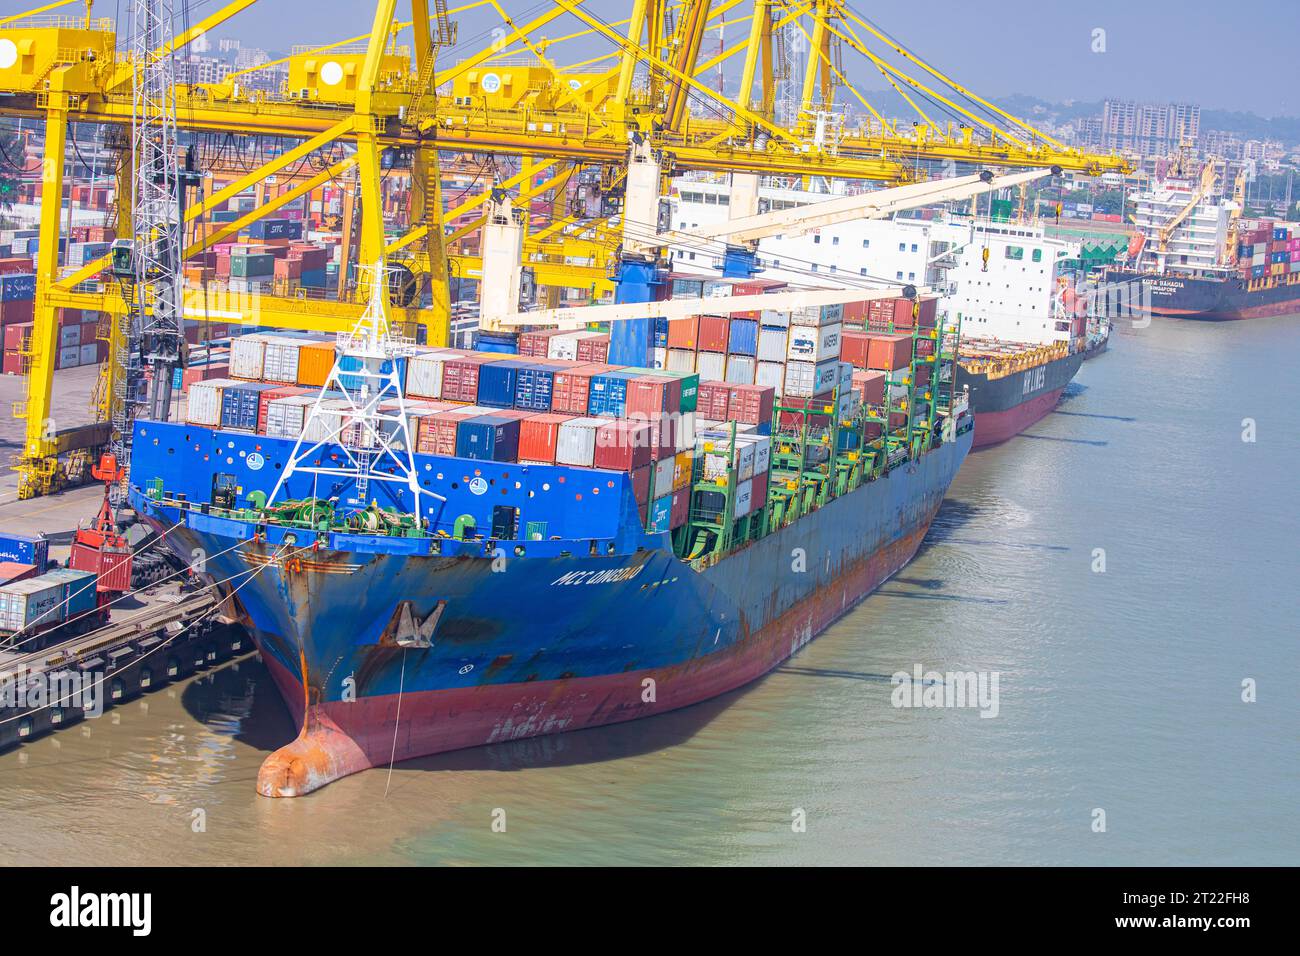 Aerial view of Chittagong Port. It is the main seaport of Bangladesh. Located in Bangladesh's port city of Chittagong and on the banks of the Karnaphu Stock Photo